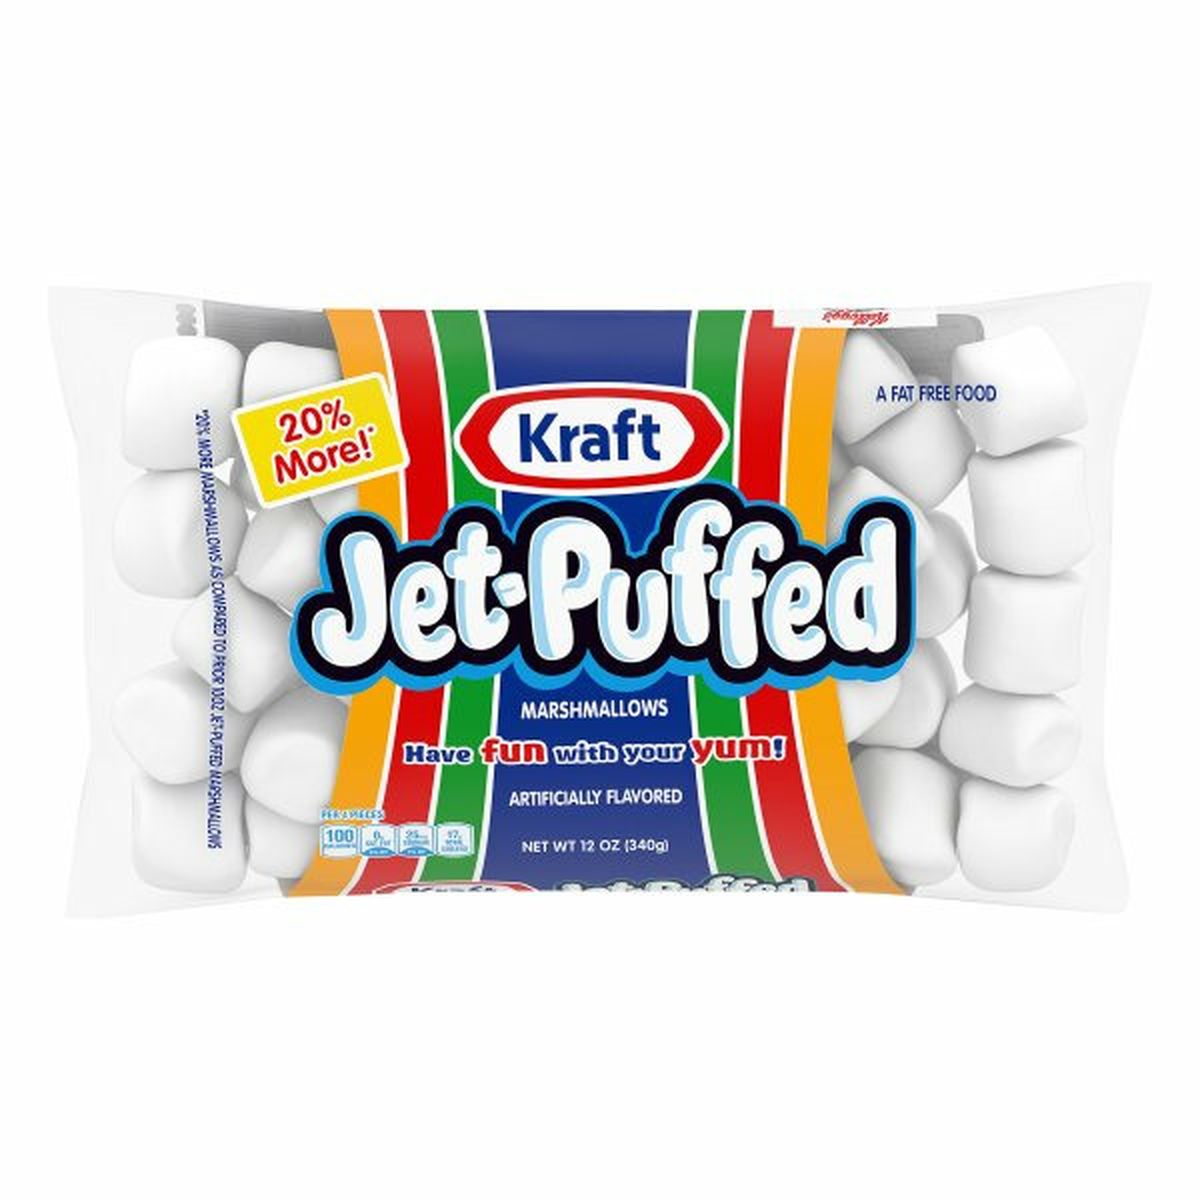 Calories in Jet-Puffed Marshmallows